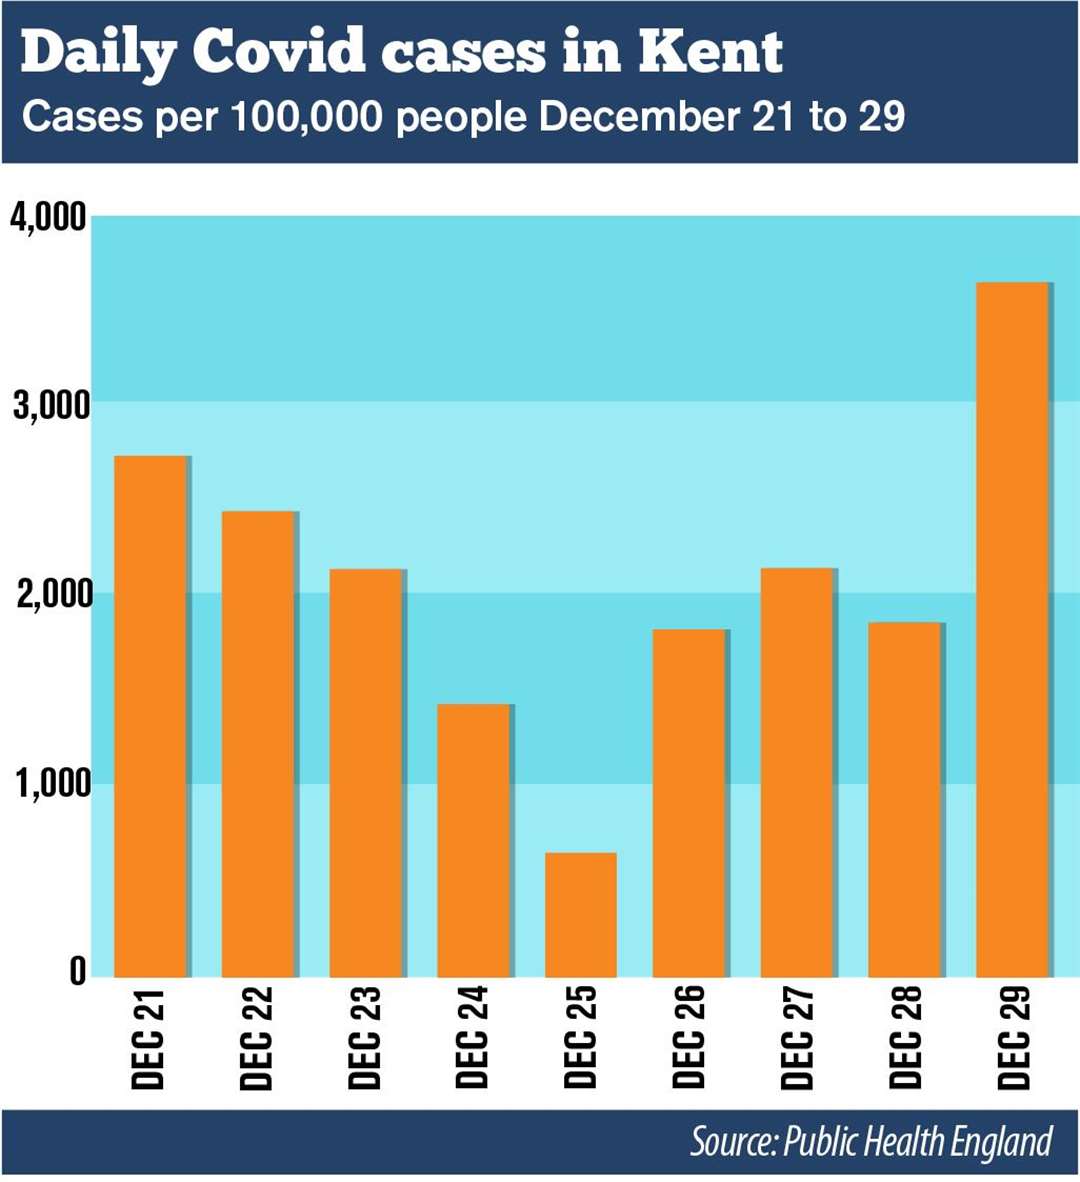 The daily case number on December 29 was the highest ever